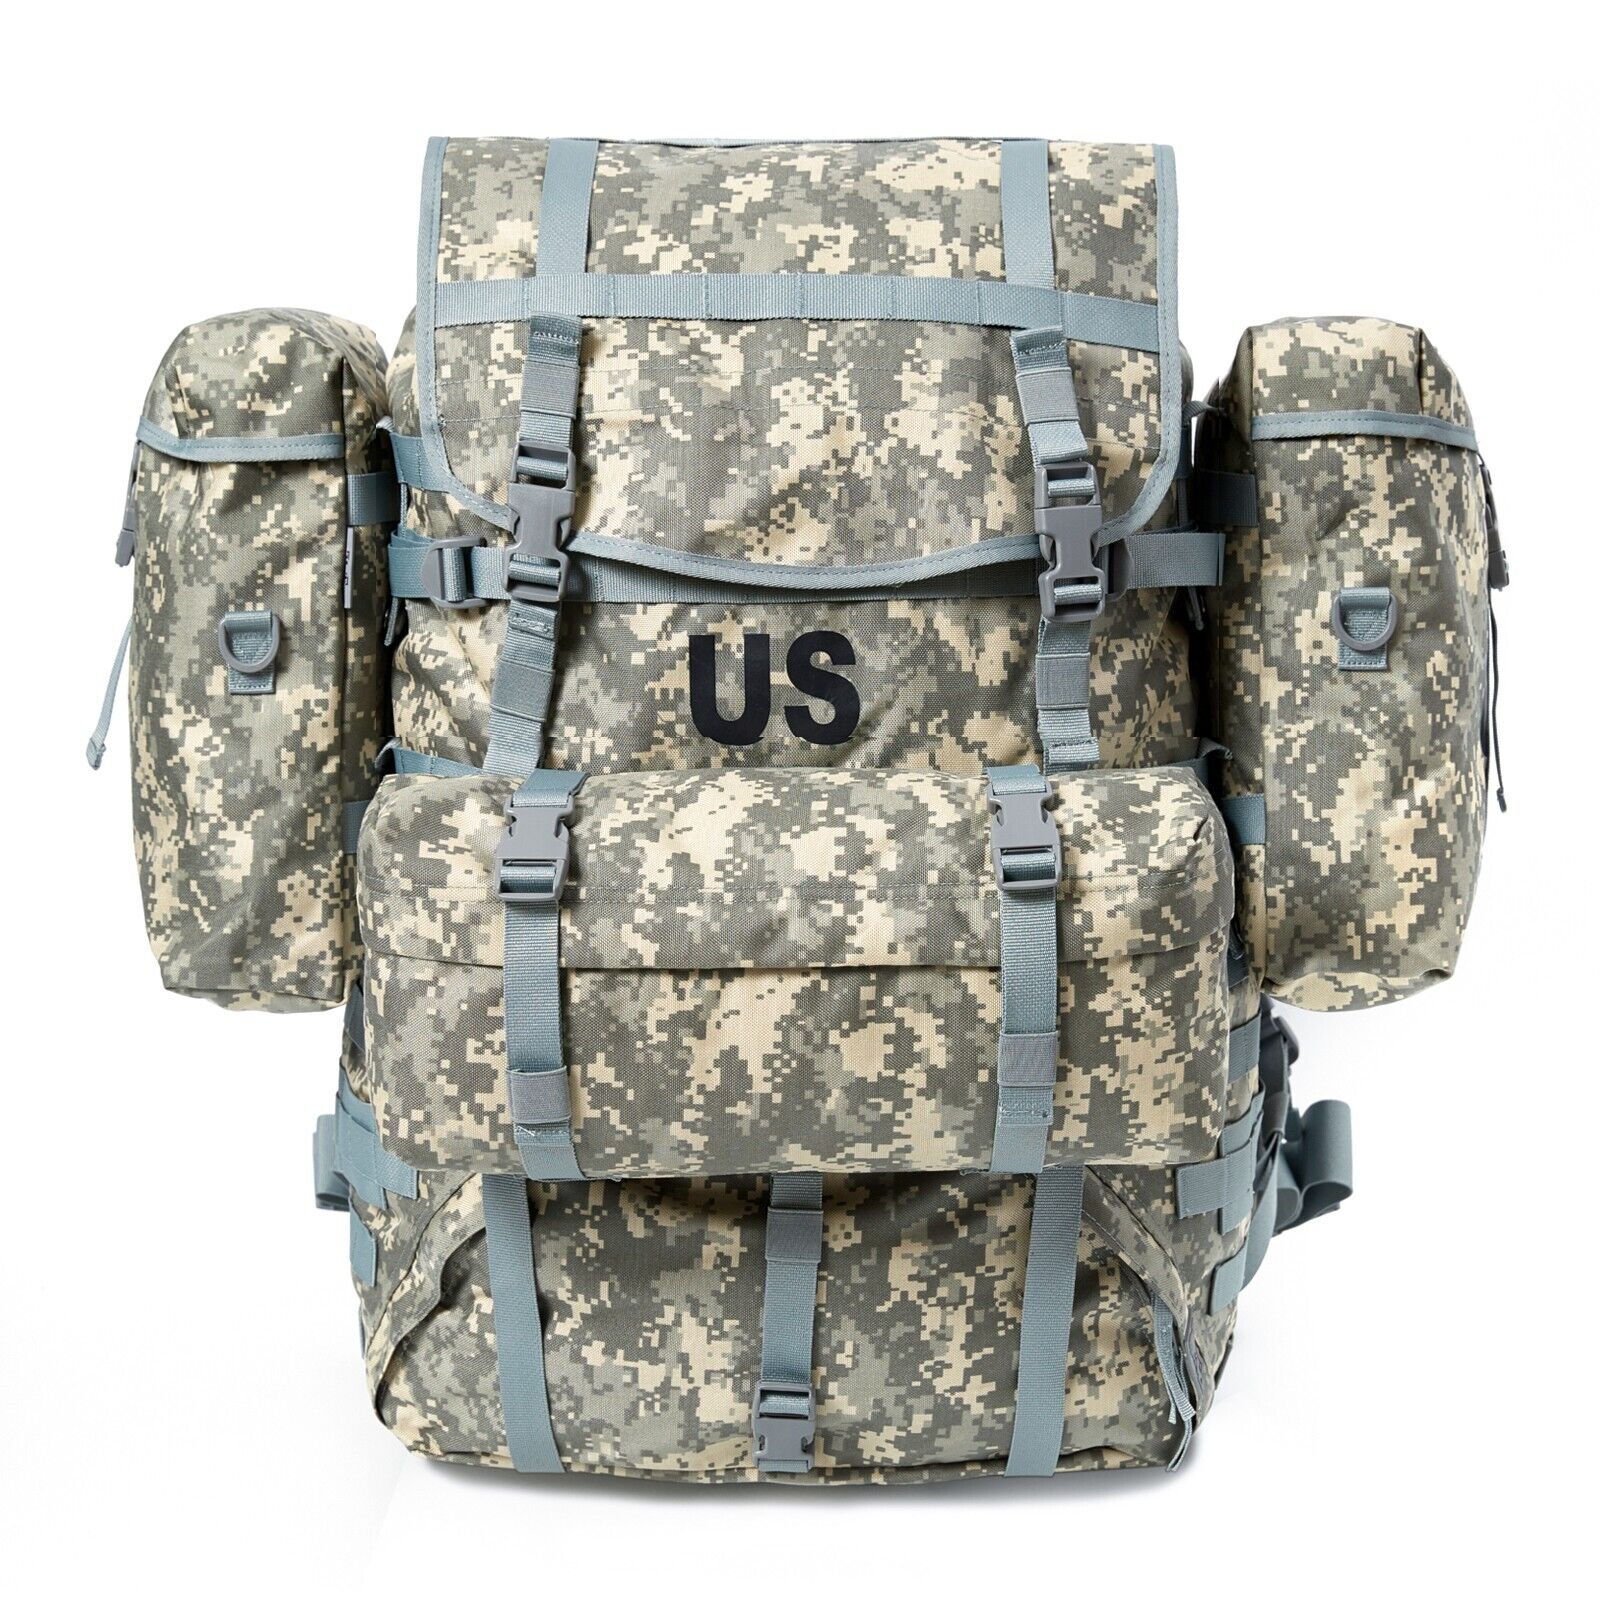 MT Military MOLLE 2 Large Rucksack with Frame, Army Tactical Backpack - UCP